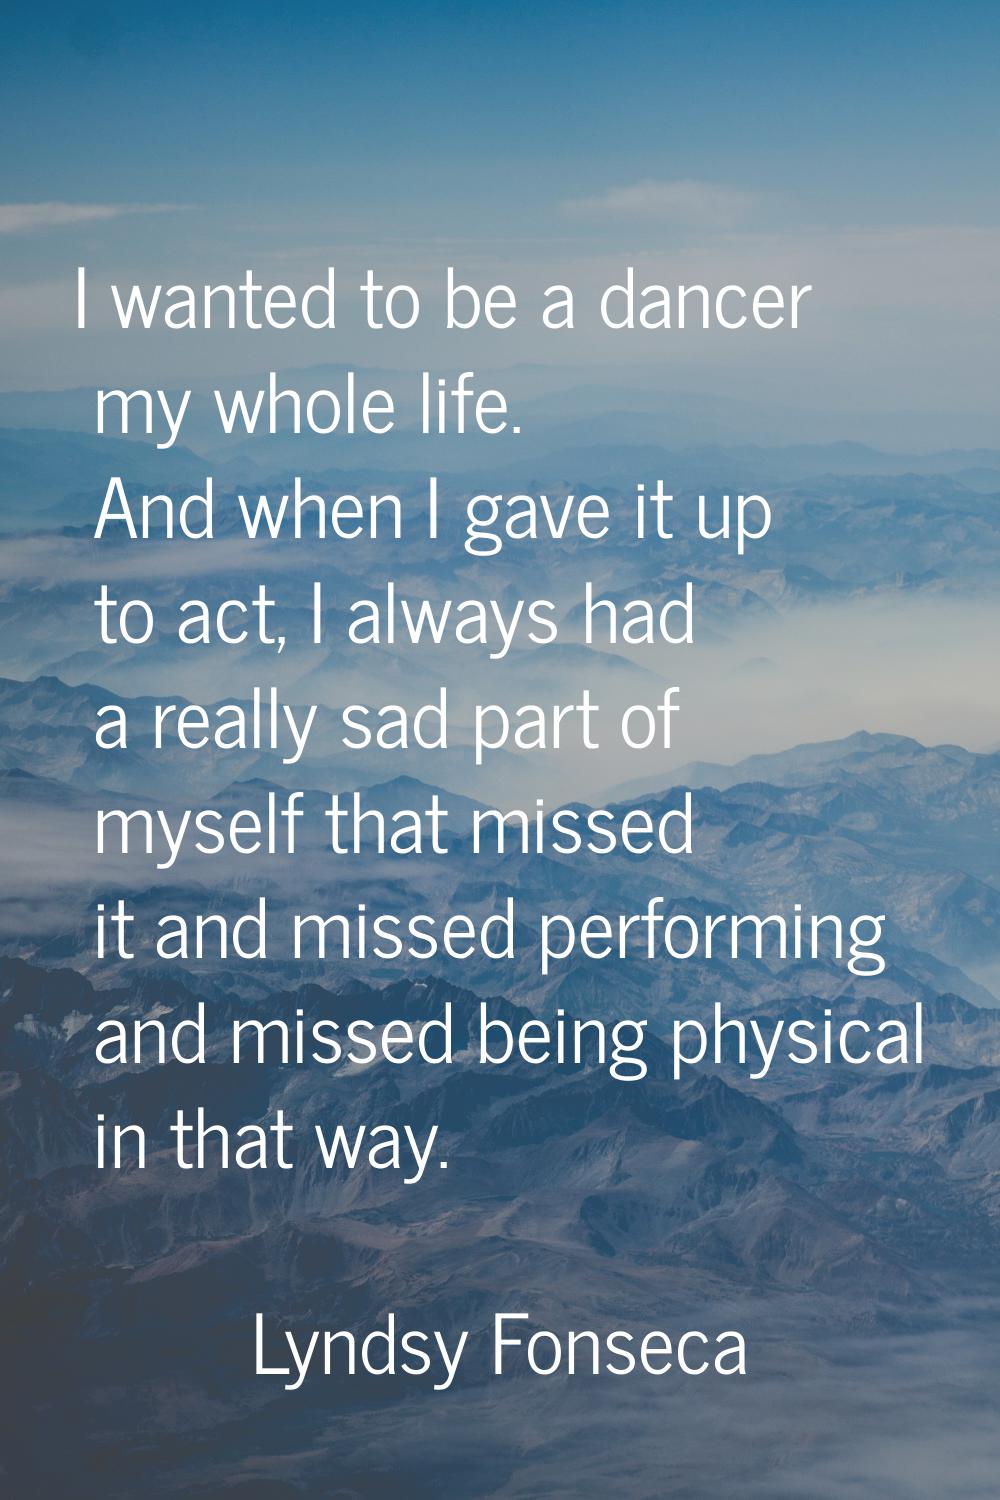 I wanted to be a dancer my whole life. And when I gave it up to act, I always had a really sad part